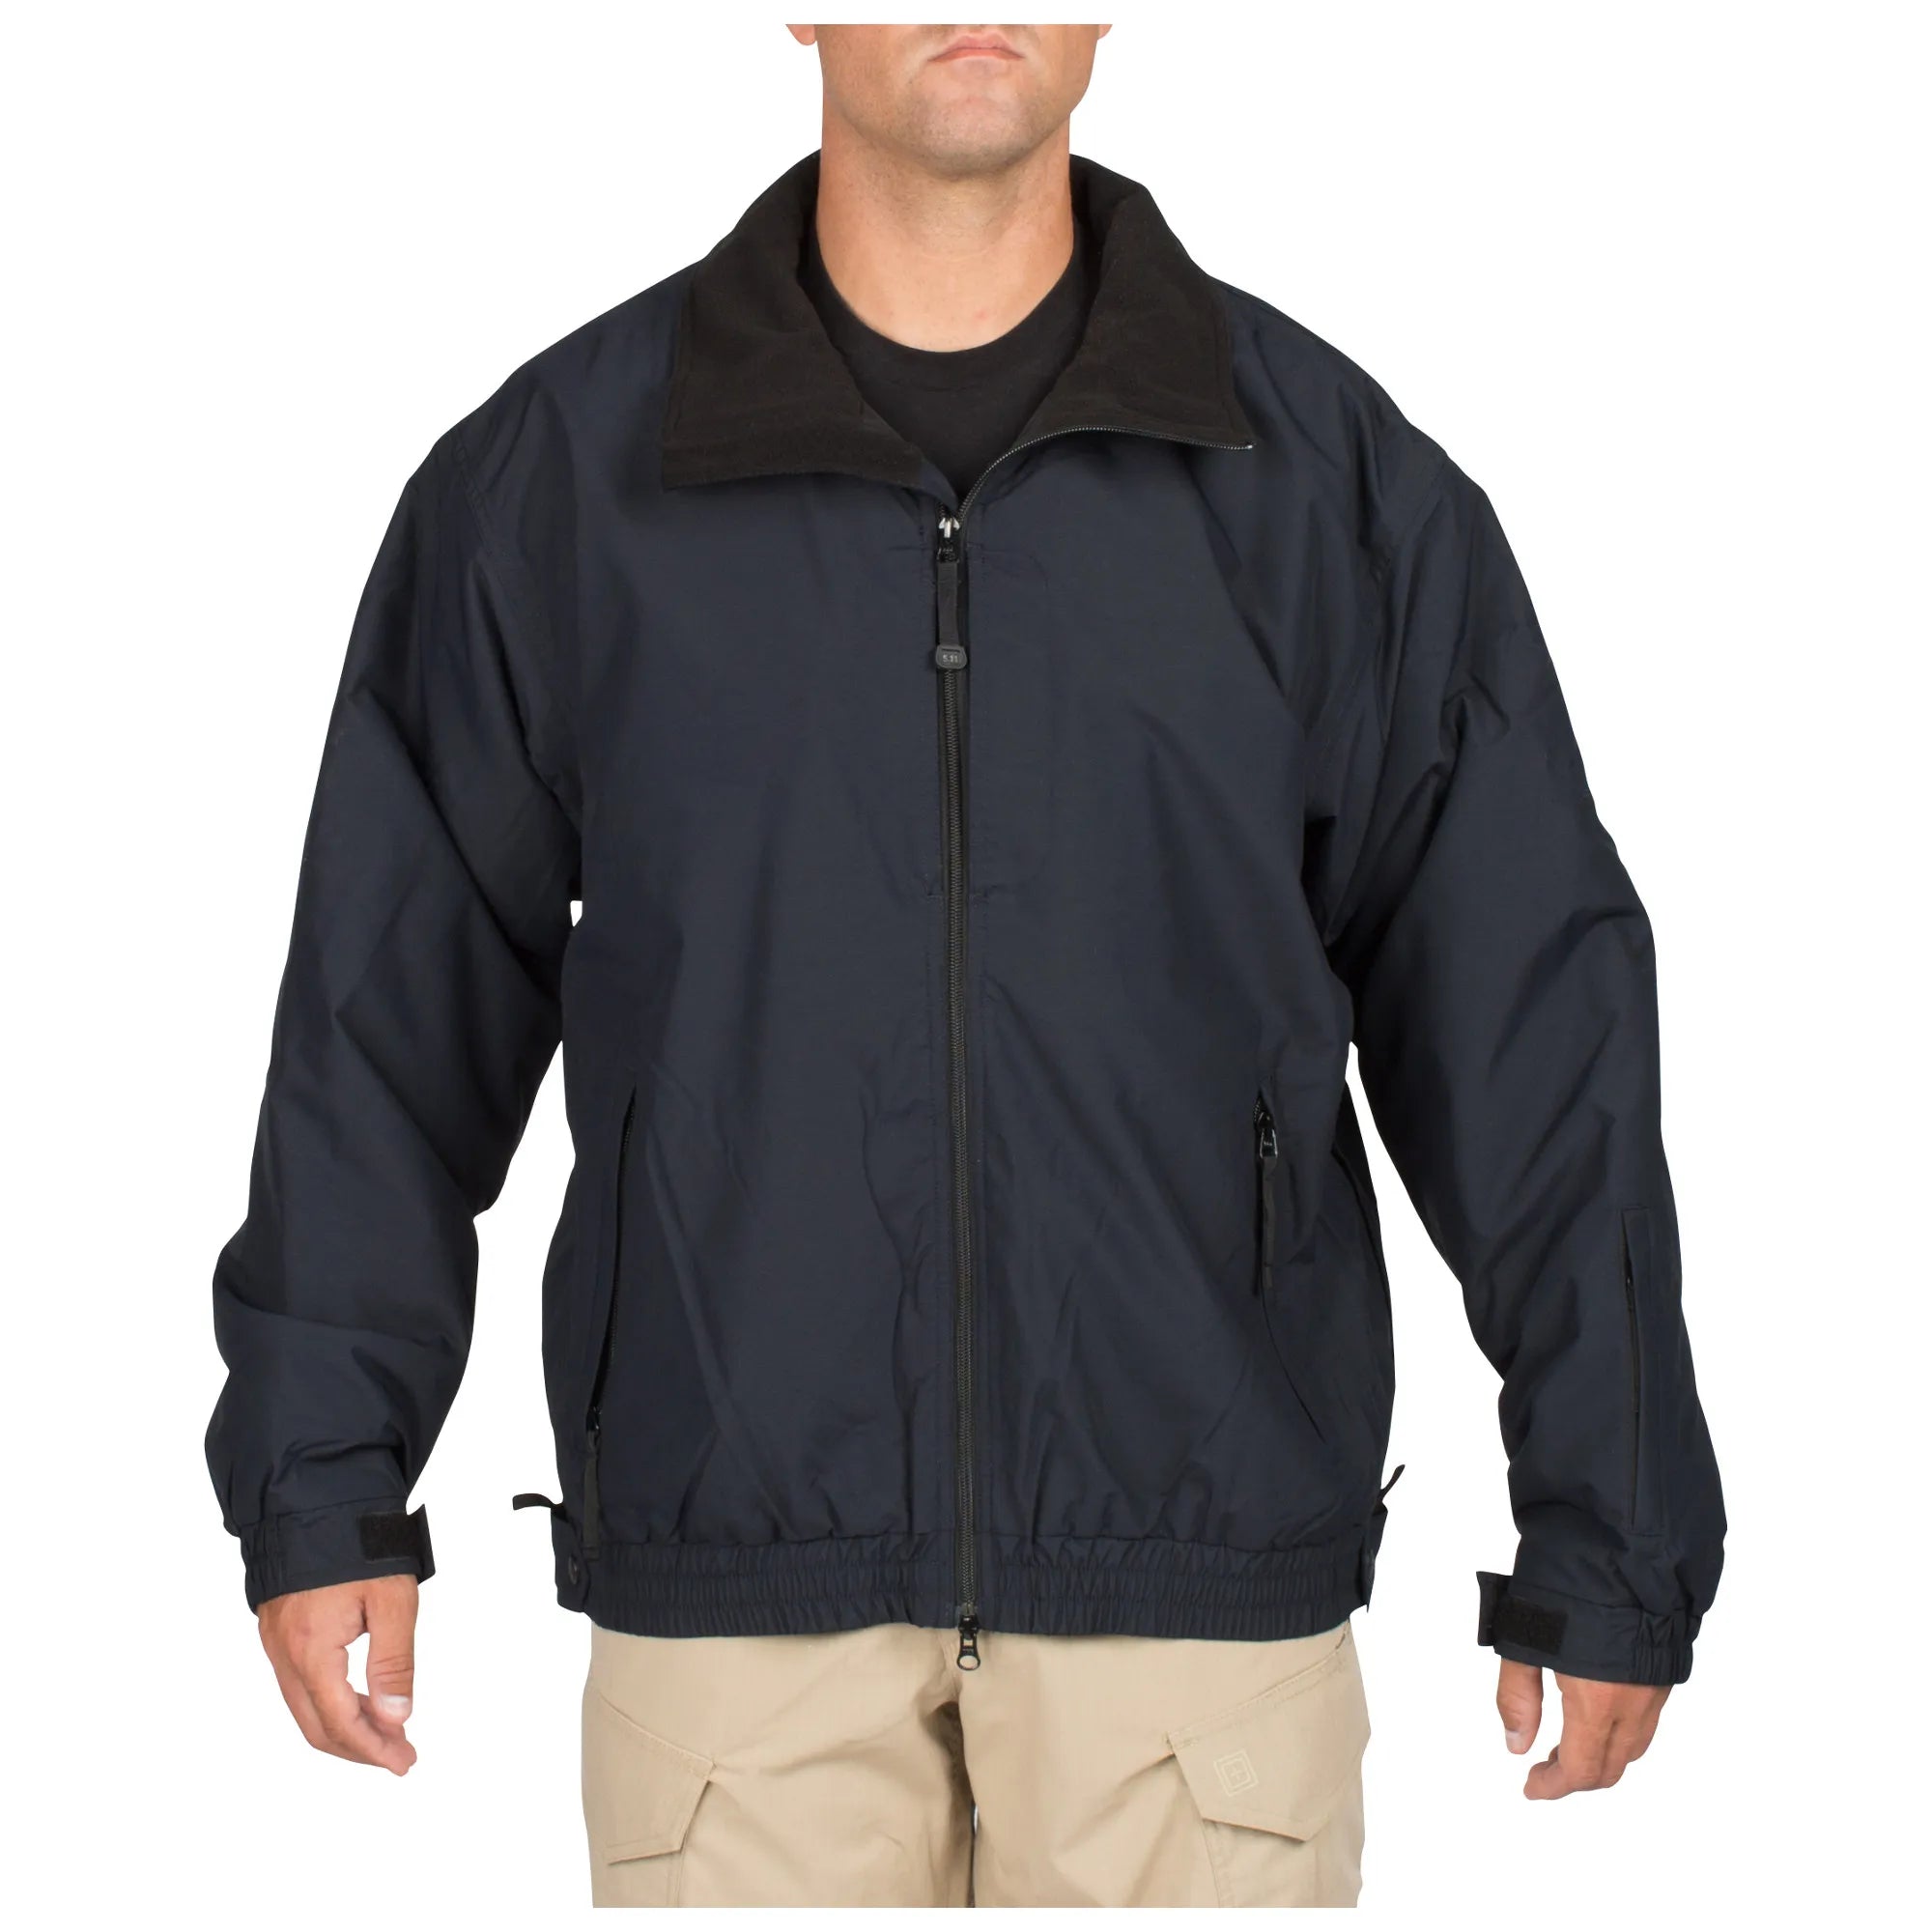 5.11 Tactical Big Horn Jacket 48026 - Clothing & Accessories